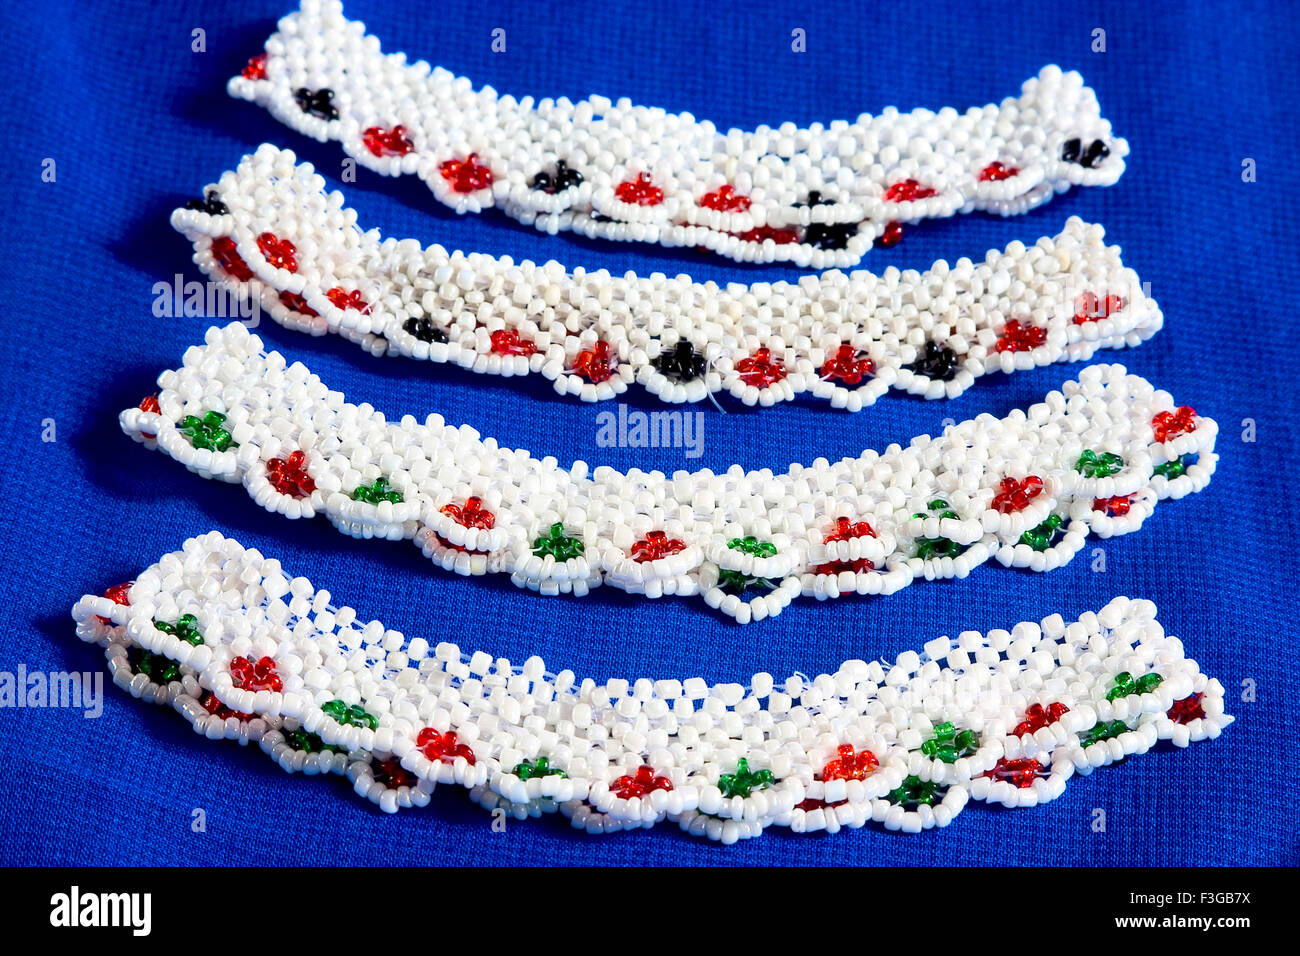 Two Pair of beads anklets on blue cloth Stock Photo